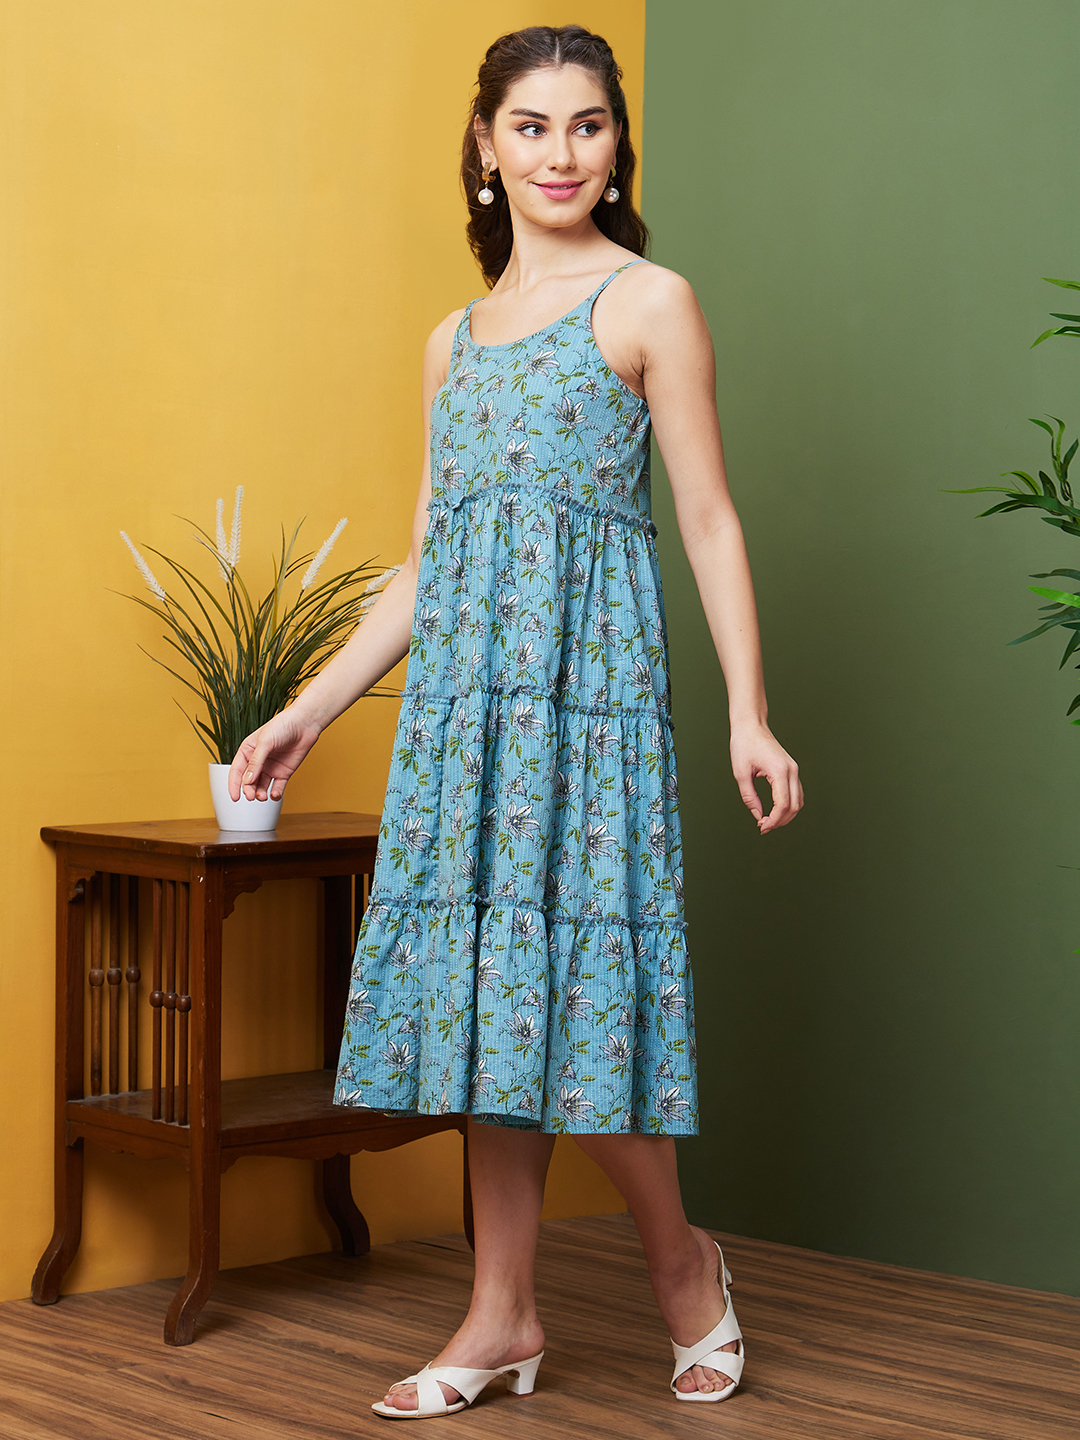 Globus Women Blue Floral Printed Casual Round Neck A-Line Ethnic Dresses